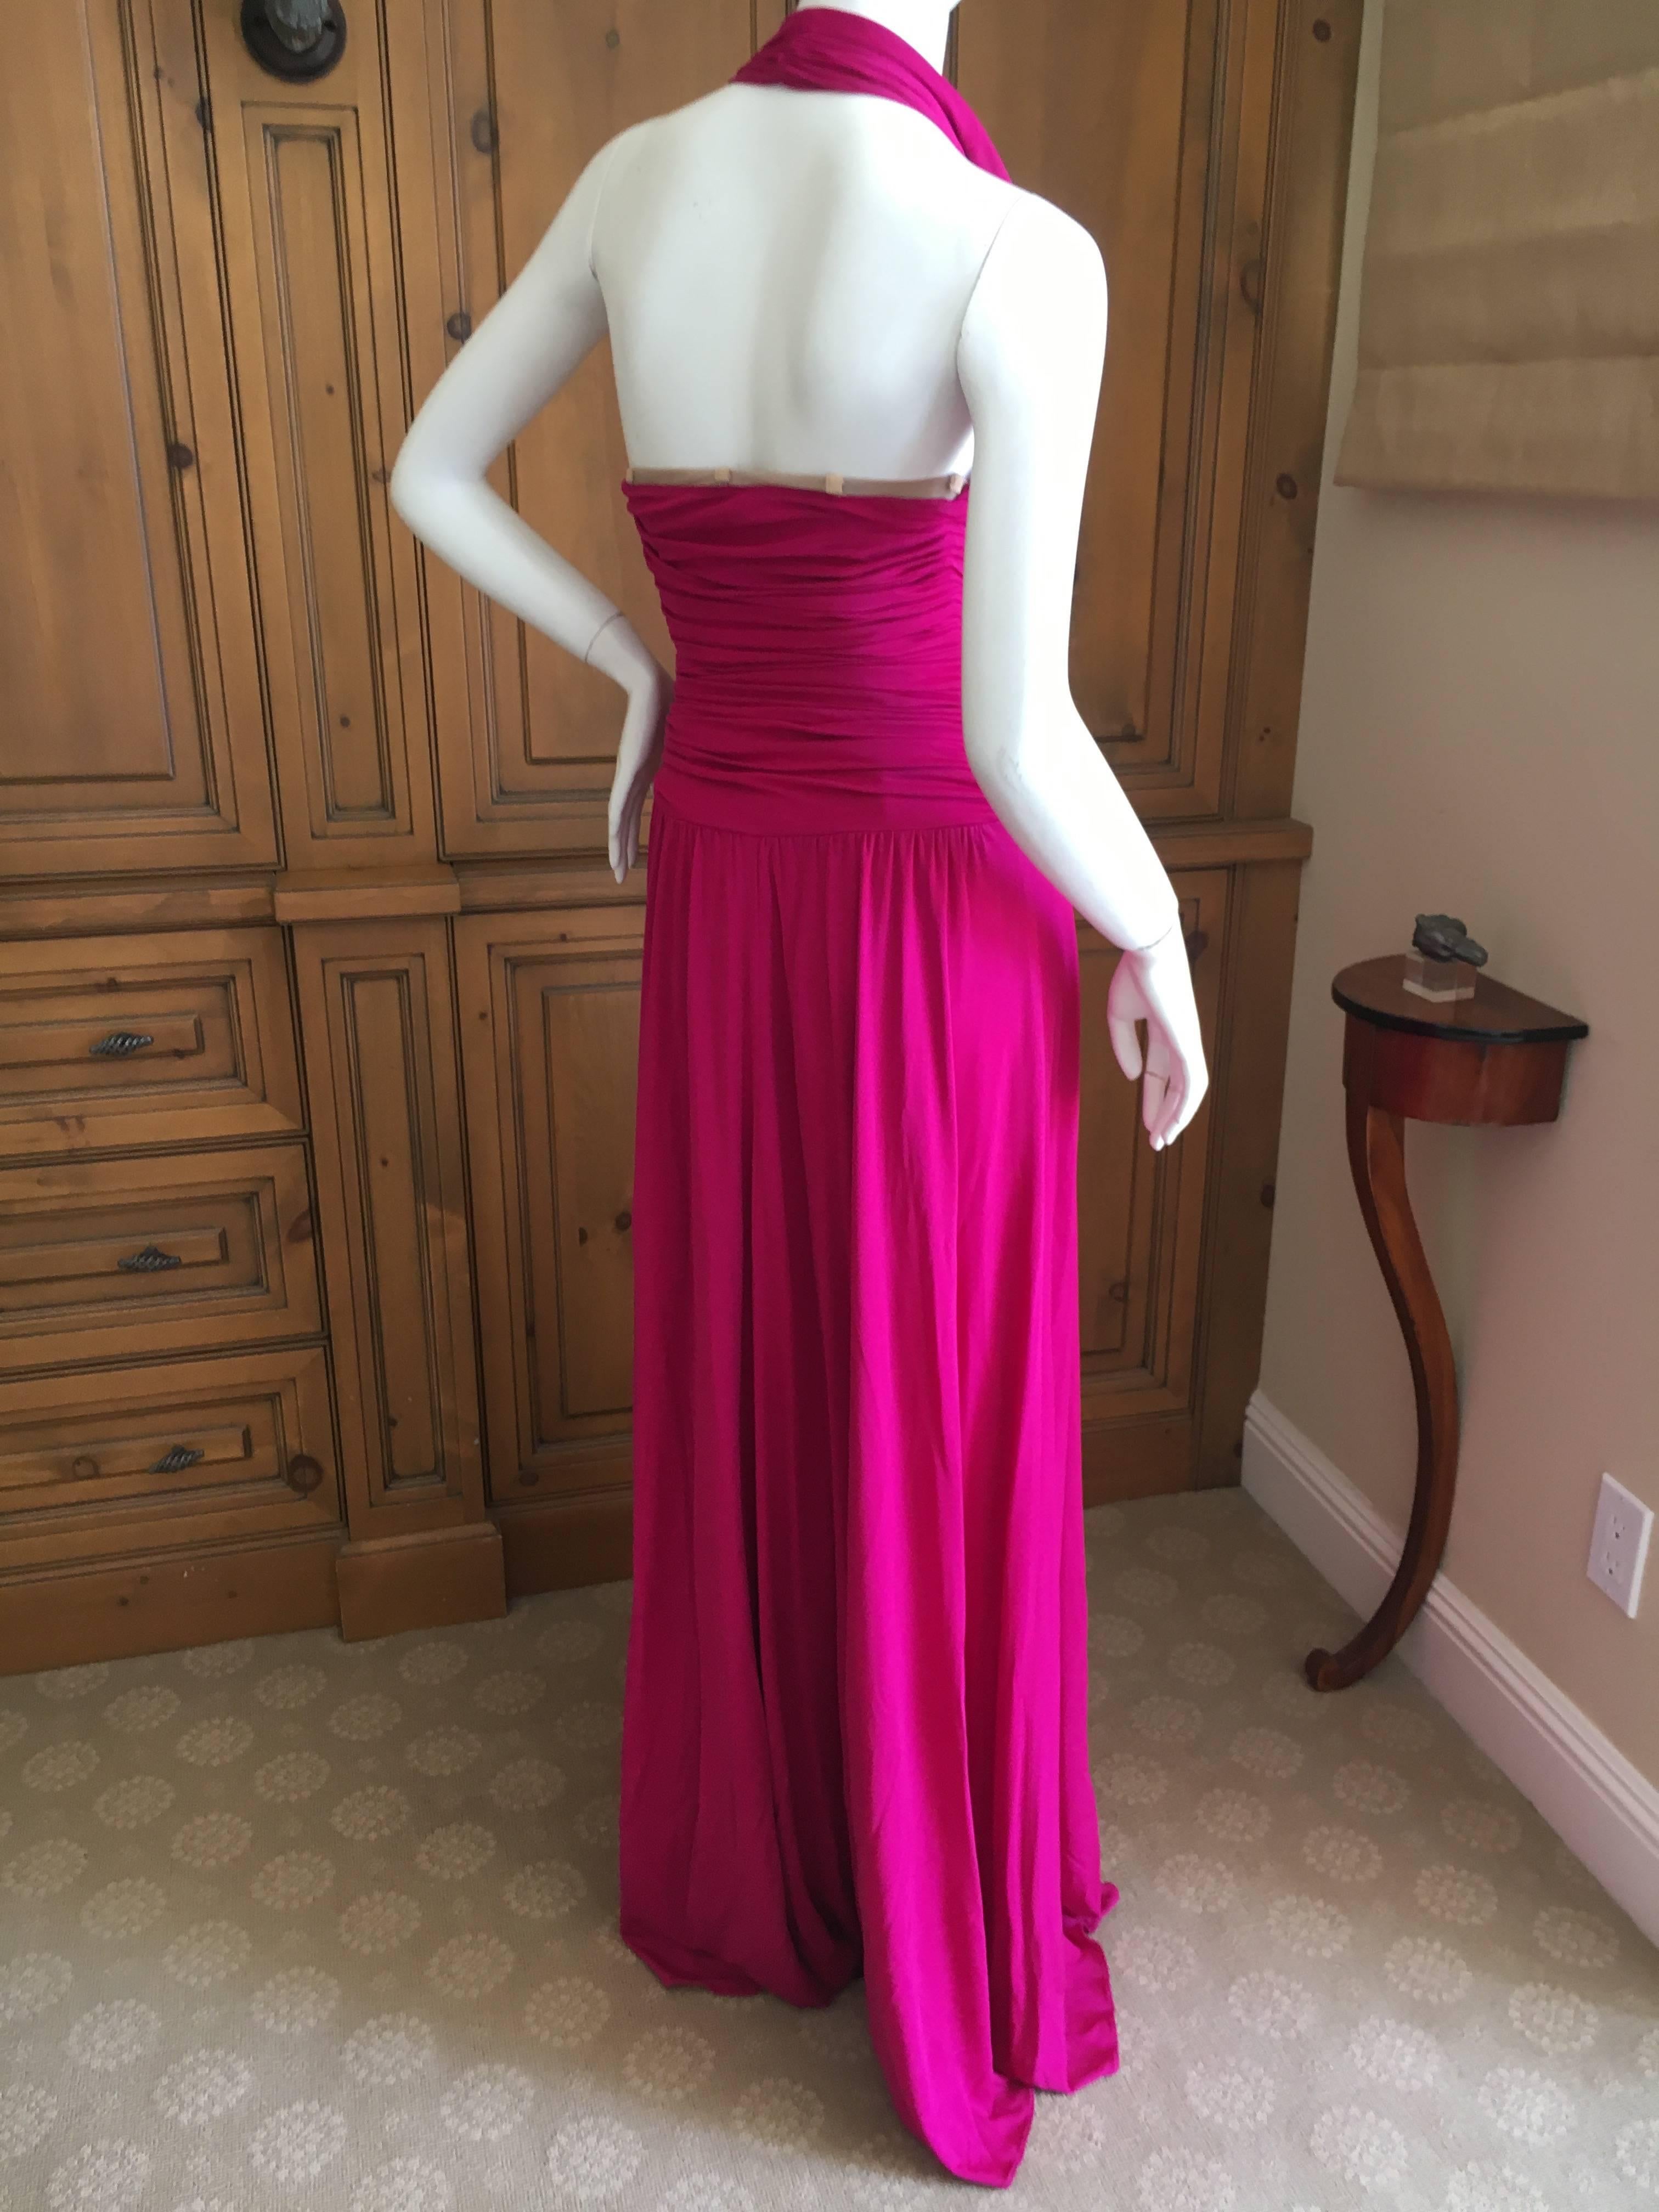 Exquisite fucsia evening dress from Giambattista Valli .
Low cut halter dress in a wonderful shade of deep pink.
Size XS
Bust 32"
Waist 24"
Hips 39"
Length 64"
Excellent condition